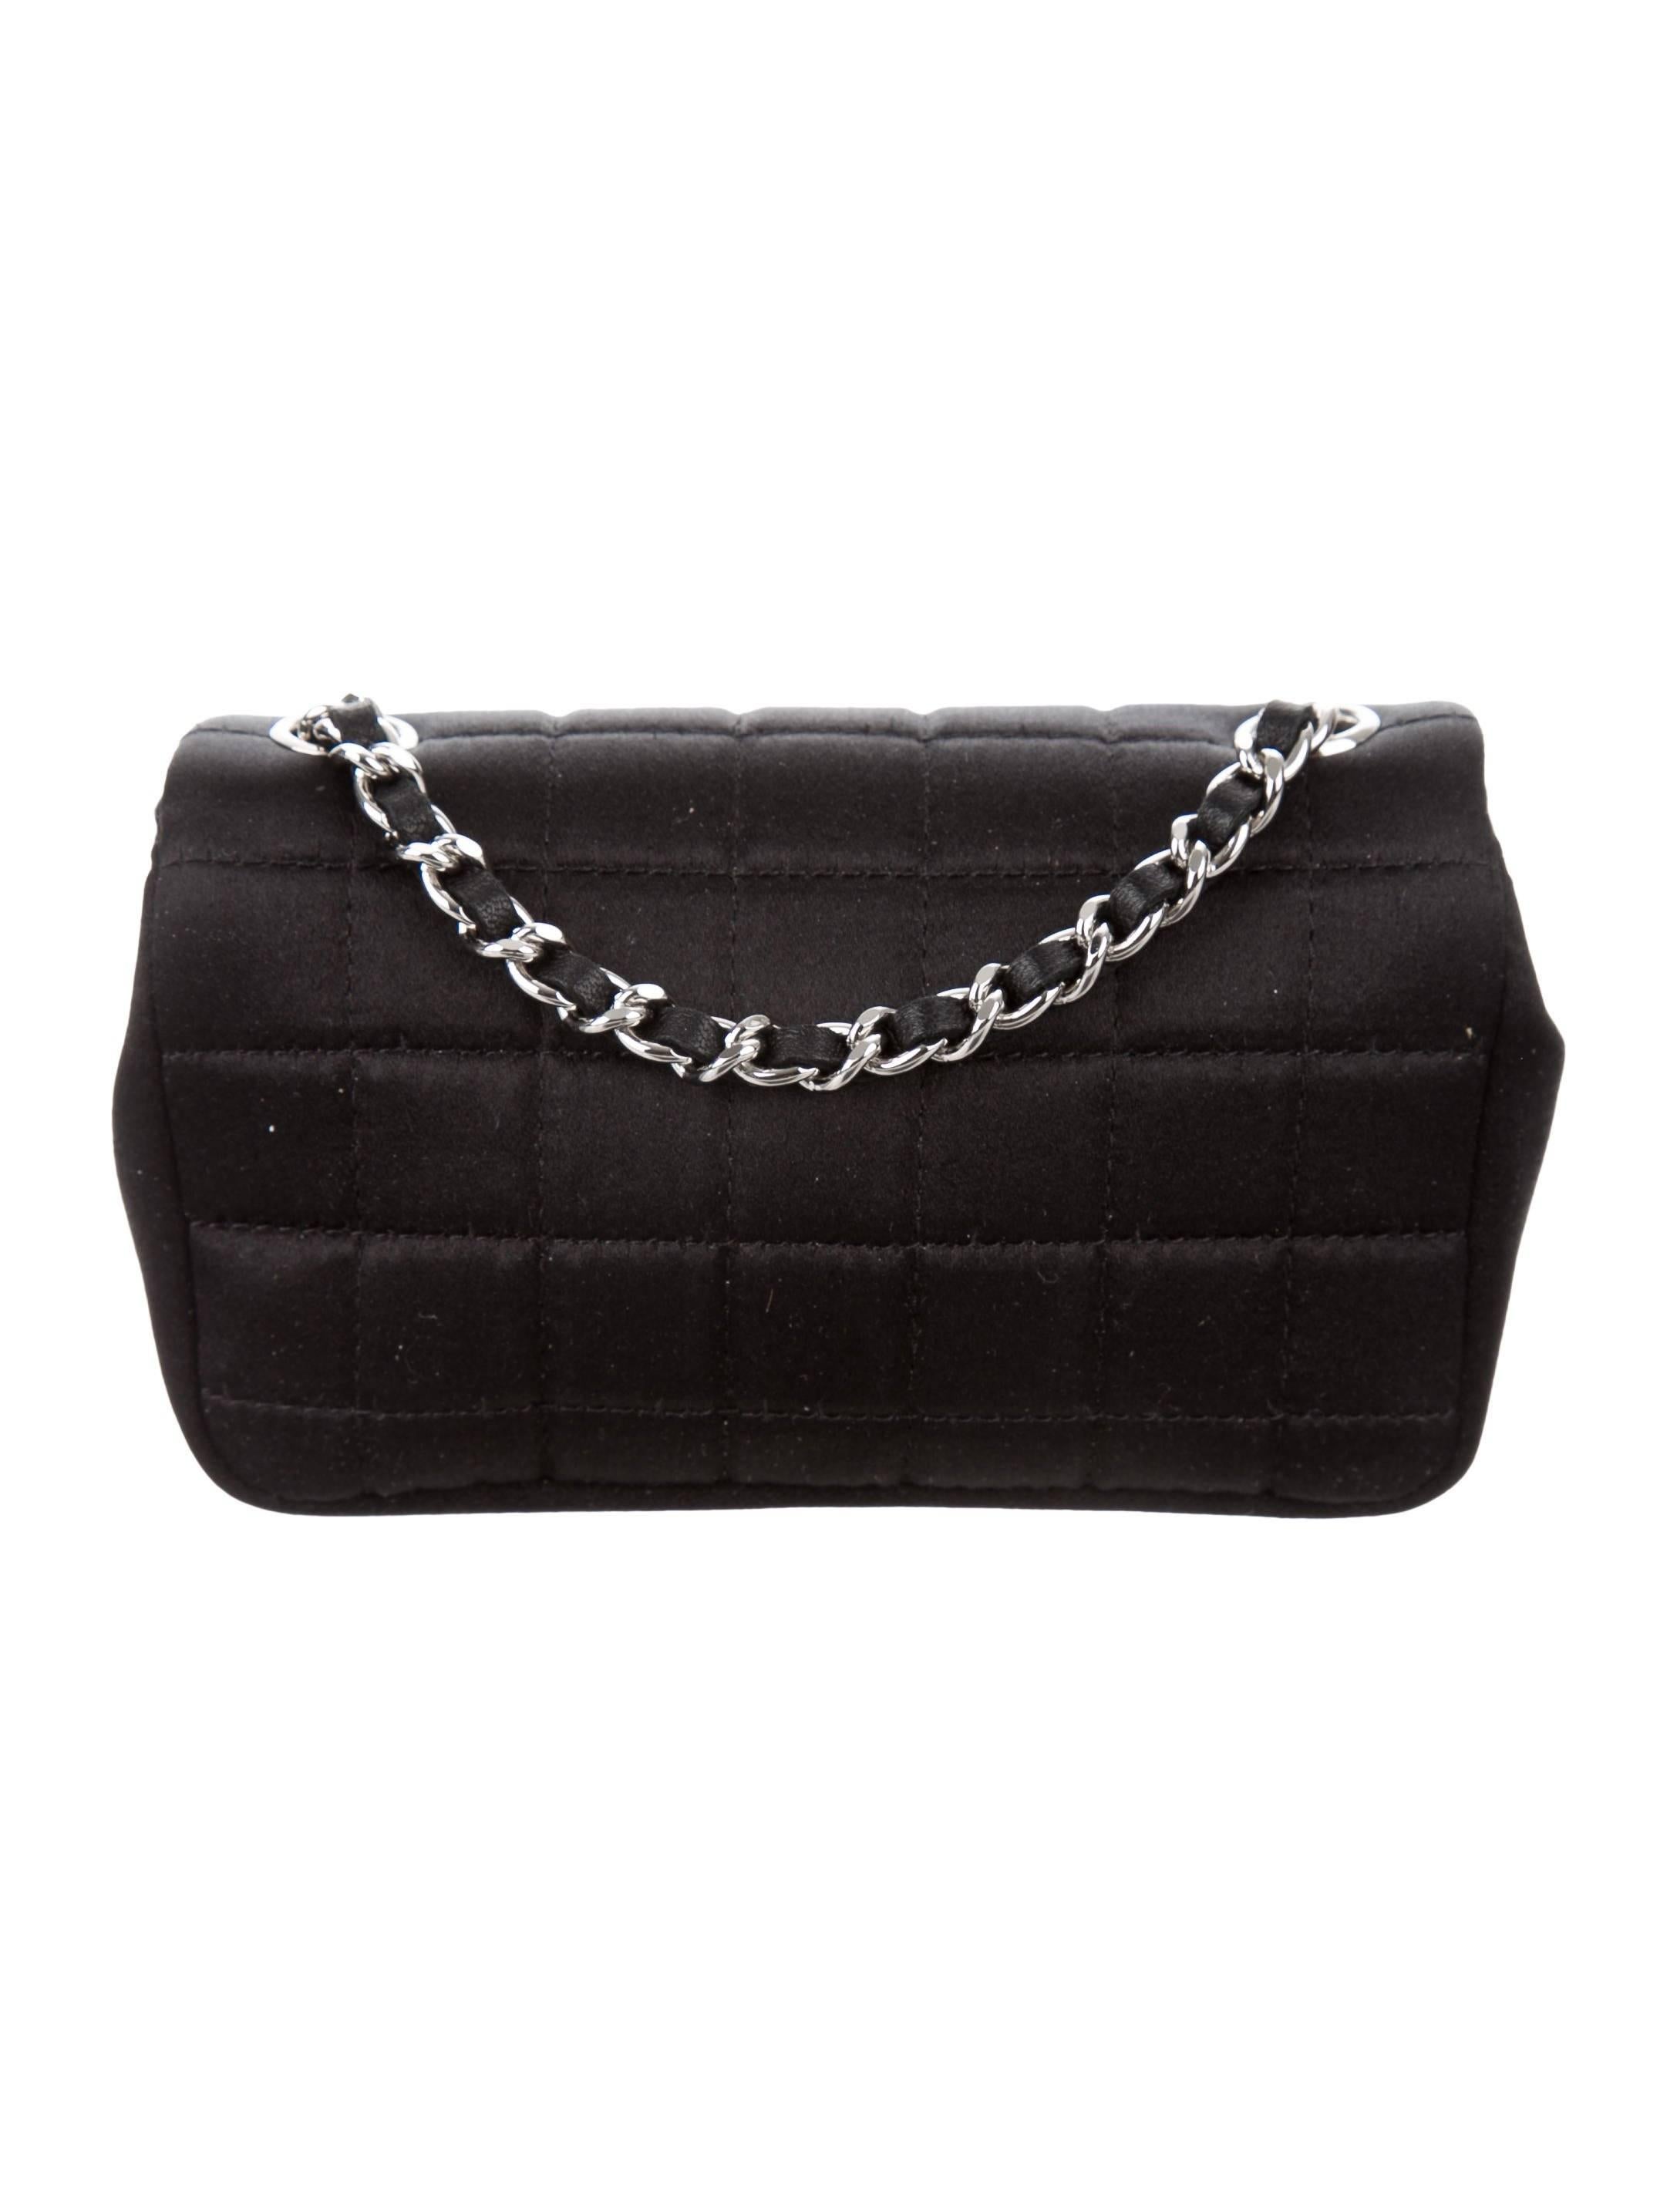 Chanel New Black Satin Silver Racket Lipstick Small Evening Shoulder Flap Bag

Satin 
Silver-tone hardware
Woven lining
Turn-lock closure 
Date code present
Shoulder strap drop 23"
Includes original Chanel authenticity card
Measures 5" W x